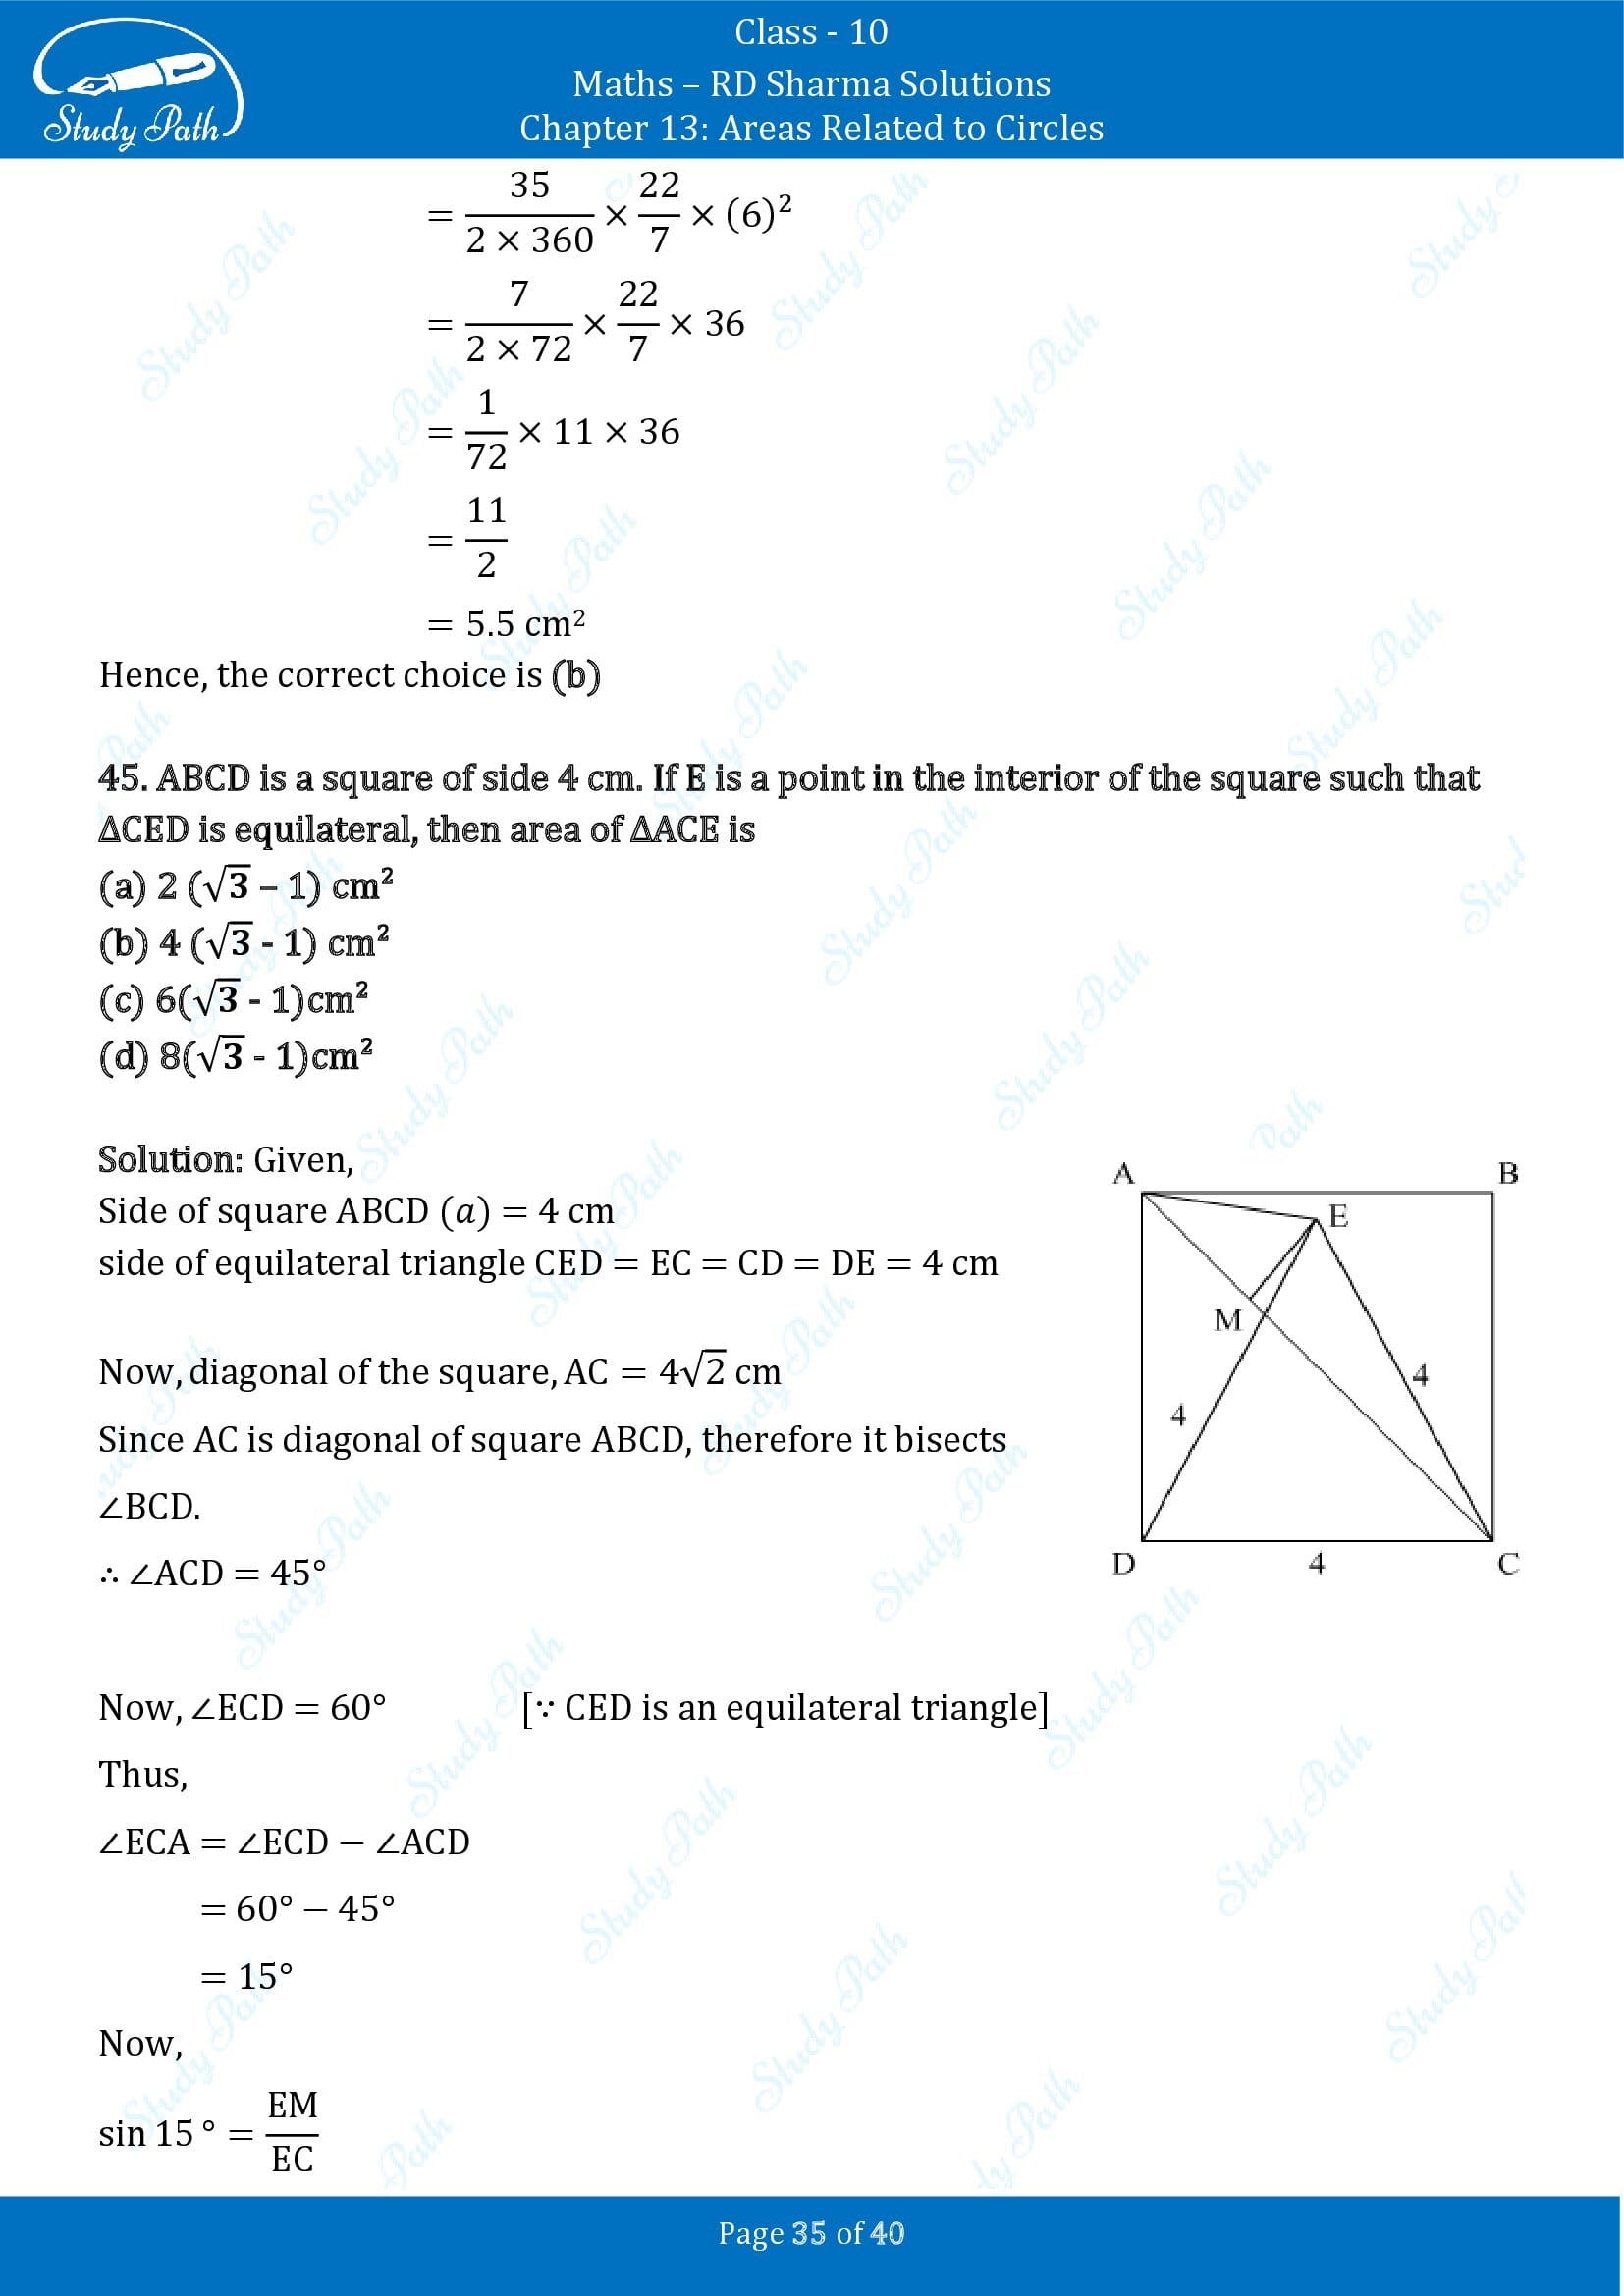 RD Sharma Solutions Class 10 Chapter 13 Areas Related to Circles Multiple Choice Question MCQs 00035